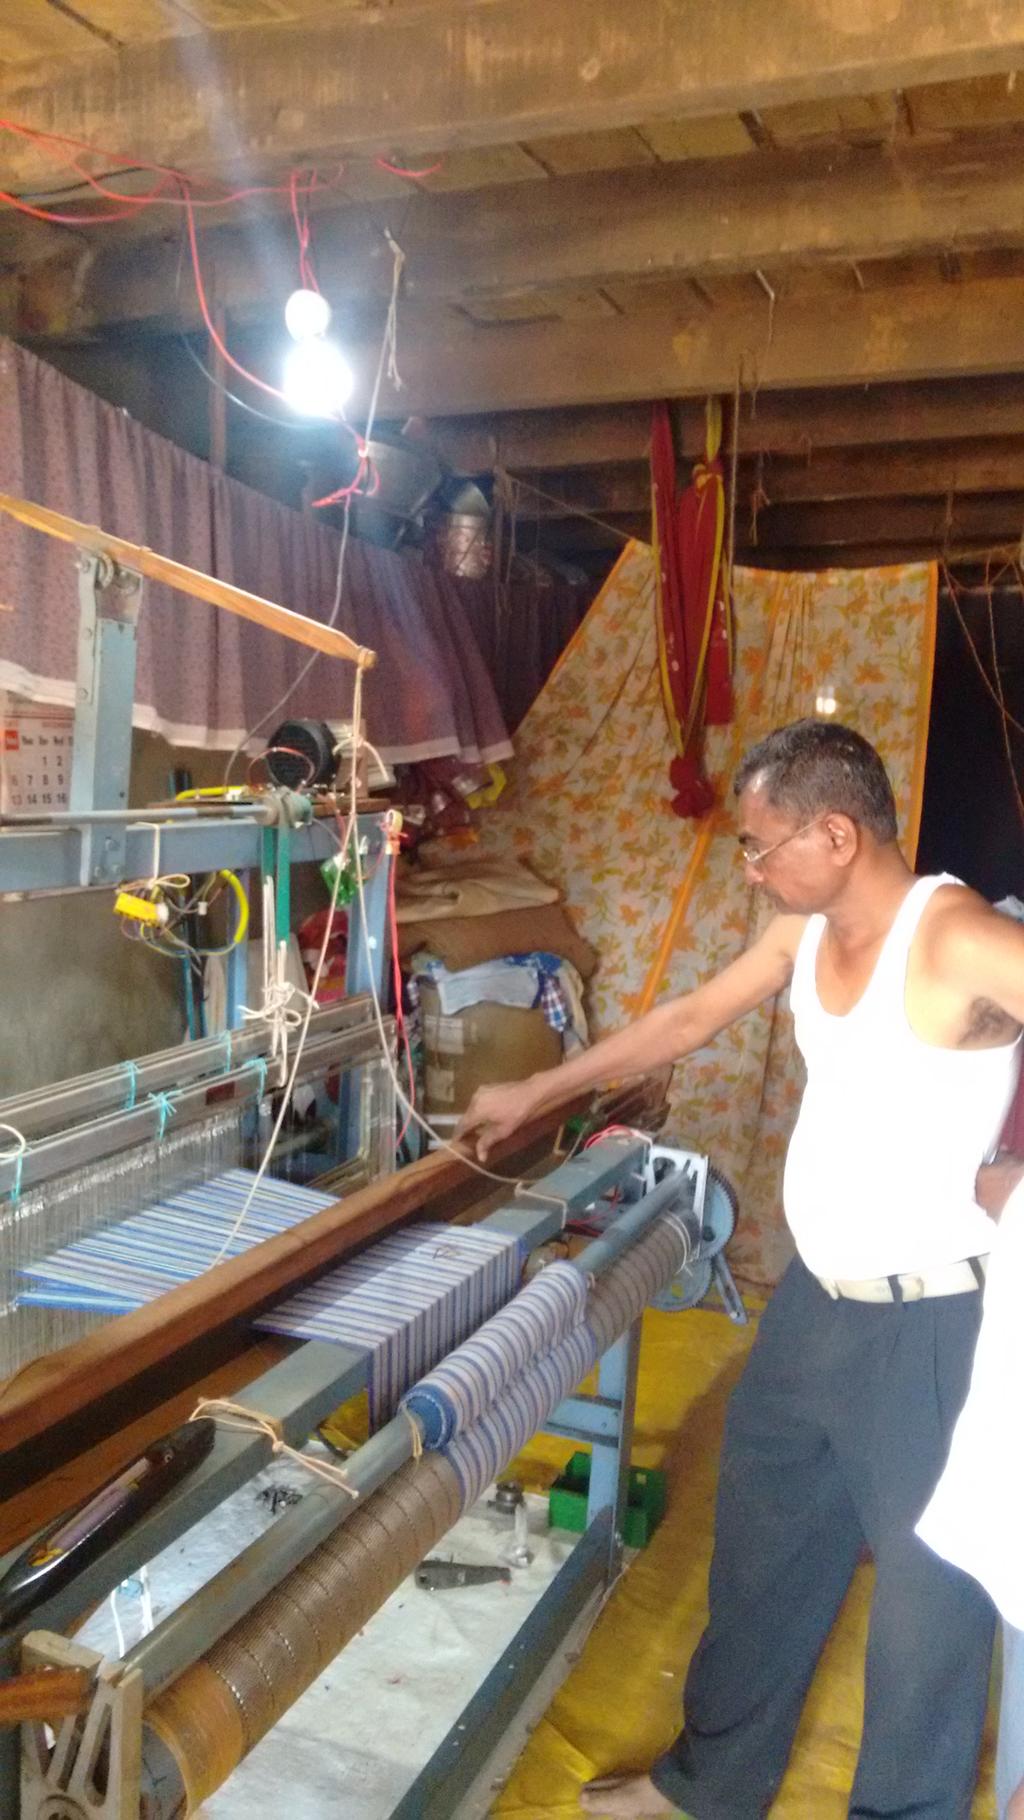 Nazir ji is a master handloom weaver in Belgaum, Karnataka. A solar loom was installed at his workshop in November 2015. At the time Nazir ji had an order to produce a large number of 1.